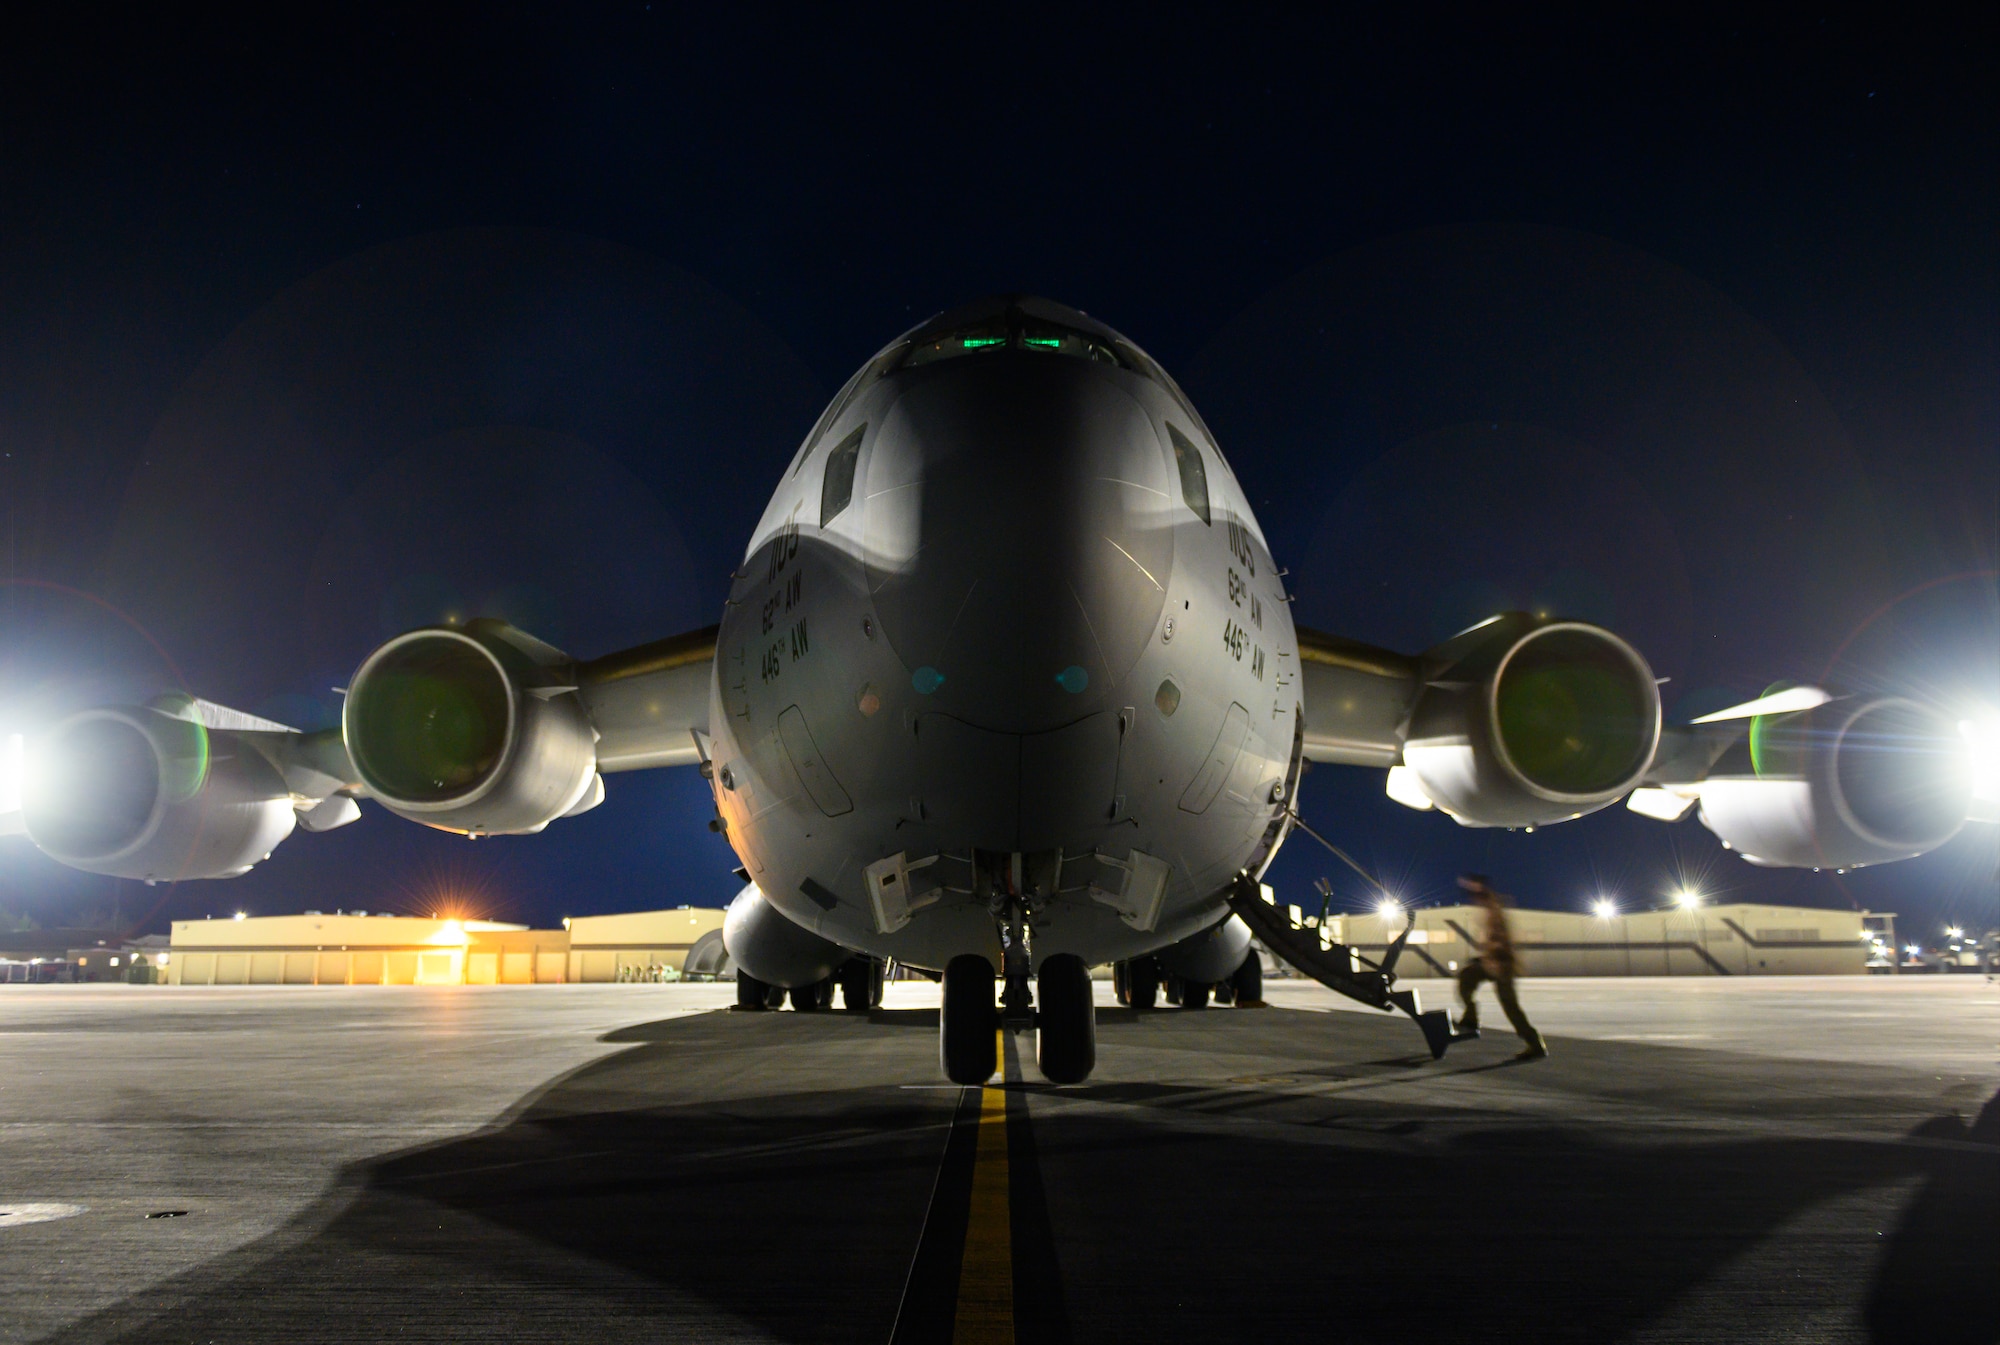 An Airman boards a C-17 Globemaster III from Joint Base Lewis-McChord, Washington, on the flight line at Mountain Home Air Force Base, Idaho, April 27, 2021. The C-17 played a prominent role in exercise Rainier War by ensuring prompt distribution of both defensive and offensive capabilities to simulated areas during the training. (U.S. Air Force photo by Staff Sgt. Christian Conrad)